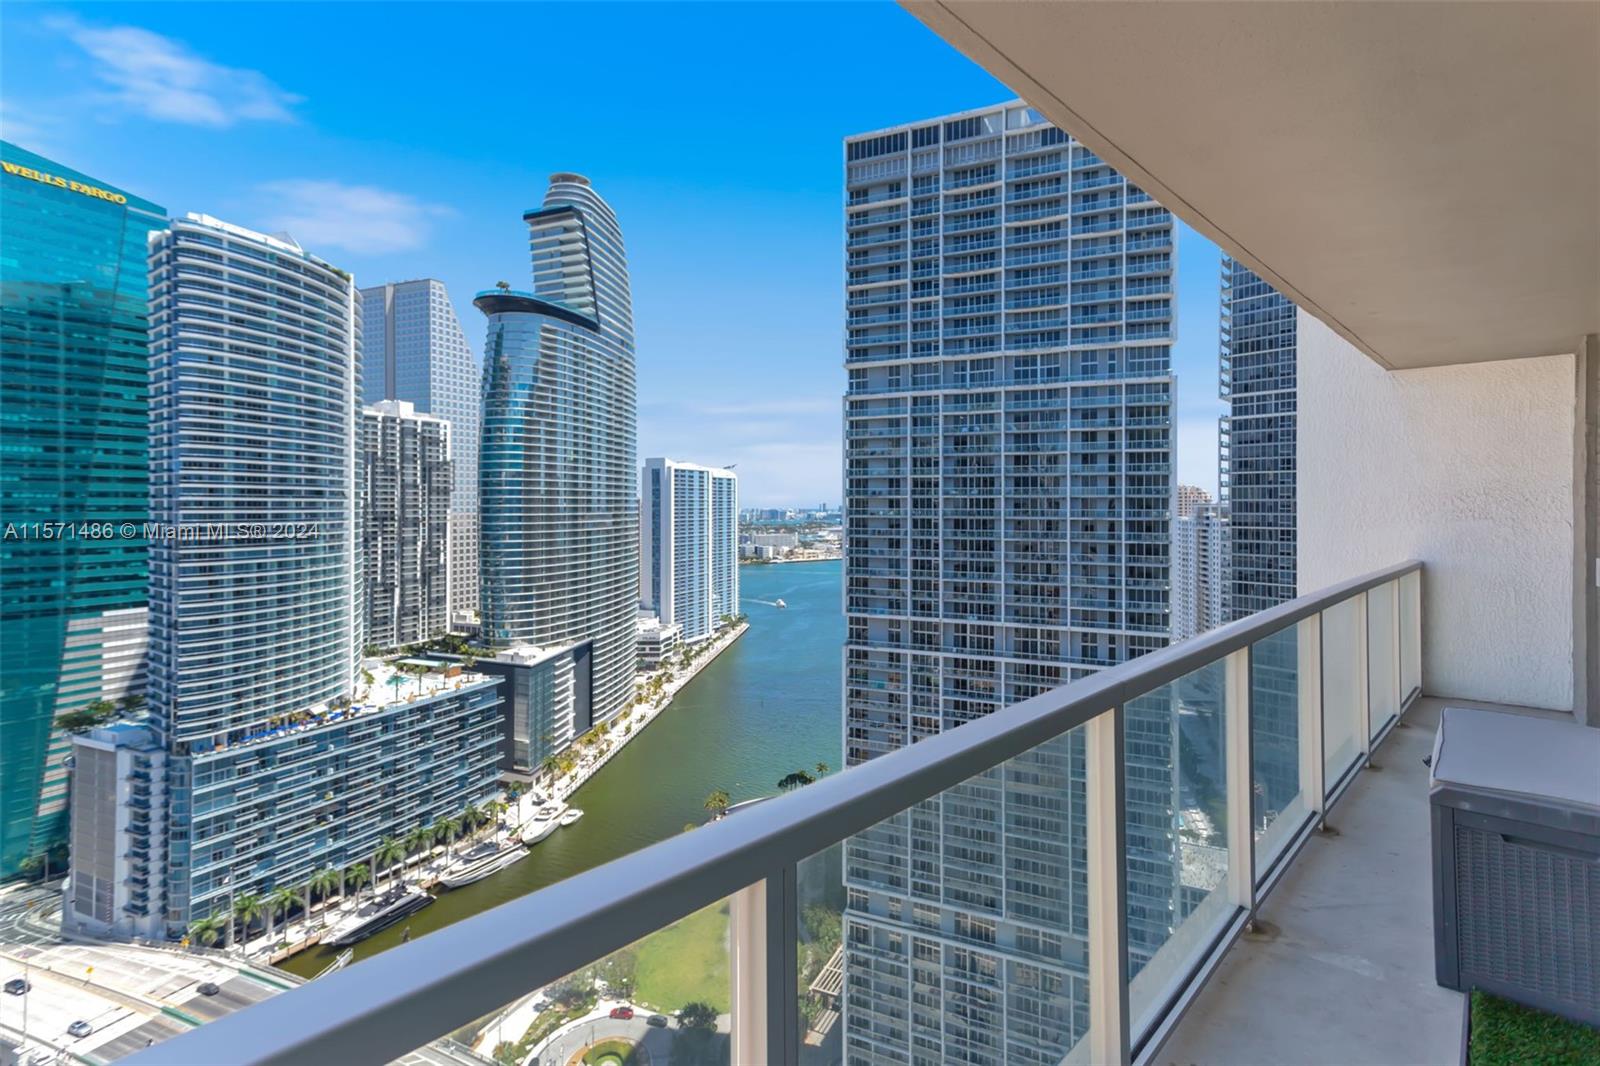 Spacious North East Corner Unit in Brickell with views of Biscayne Bay all the way to the Atlantic Ocean. Walking distance to all the great restaurants in Brickell, including Sexy Fish and Zuma, and right across the street from all the shops, dining, and nightlife at the Brickell City Center.  Enjoy nearly 1,200 sq. ft. of privacy in this Corner Unit with a large Corner Balcony, spanning the entire width of the unit, and extra windows along the western walls offering views of the Rooftop Pool.  Lots of natural light!  Open Floor Plan with Kitchen flowing into Living Room.  2 Full Bathrooms.  Long corridor off Foyer leading into Living Room offers additional privacy.  Amenities include a true Rooftop Pool on the 42nd floor,  gym, spa, media room, community room, and more!